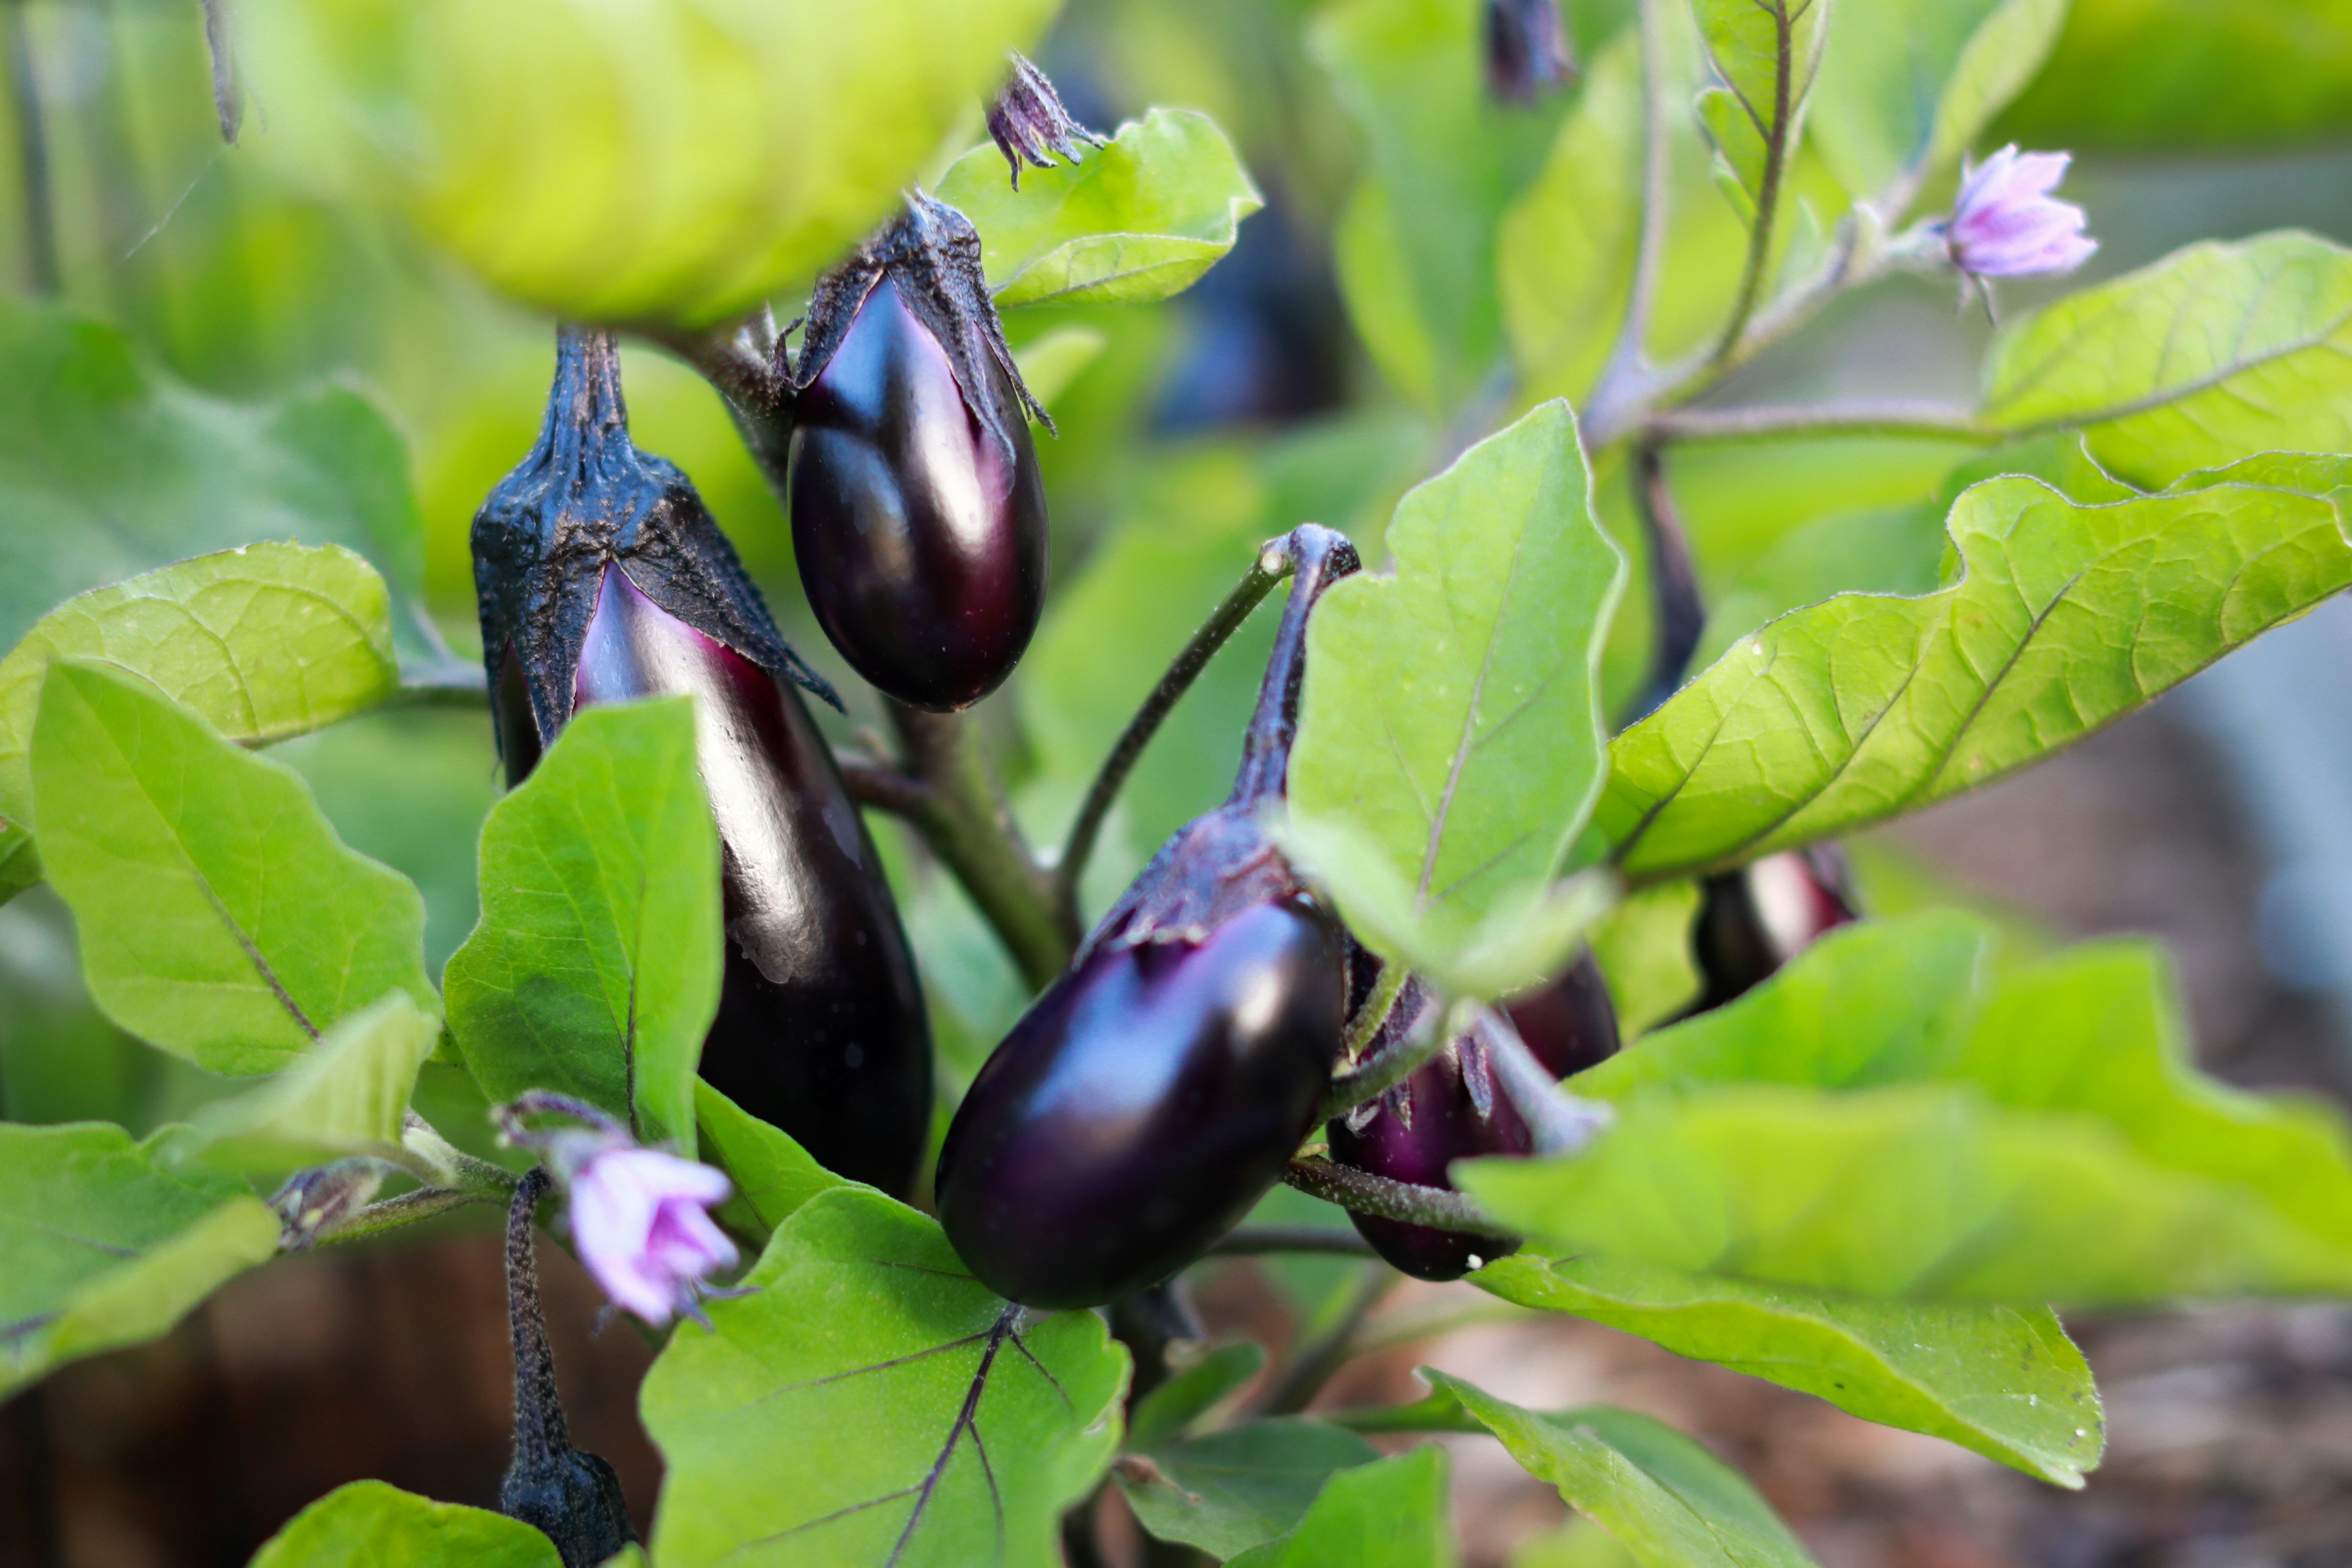 Nightshade plants like eggplant, peppers, potatoes, and tomatoes should grow in separate areas of the garden to minimize pest and disease problems.